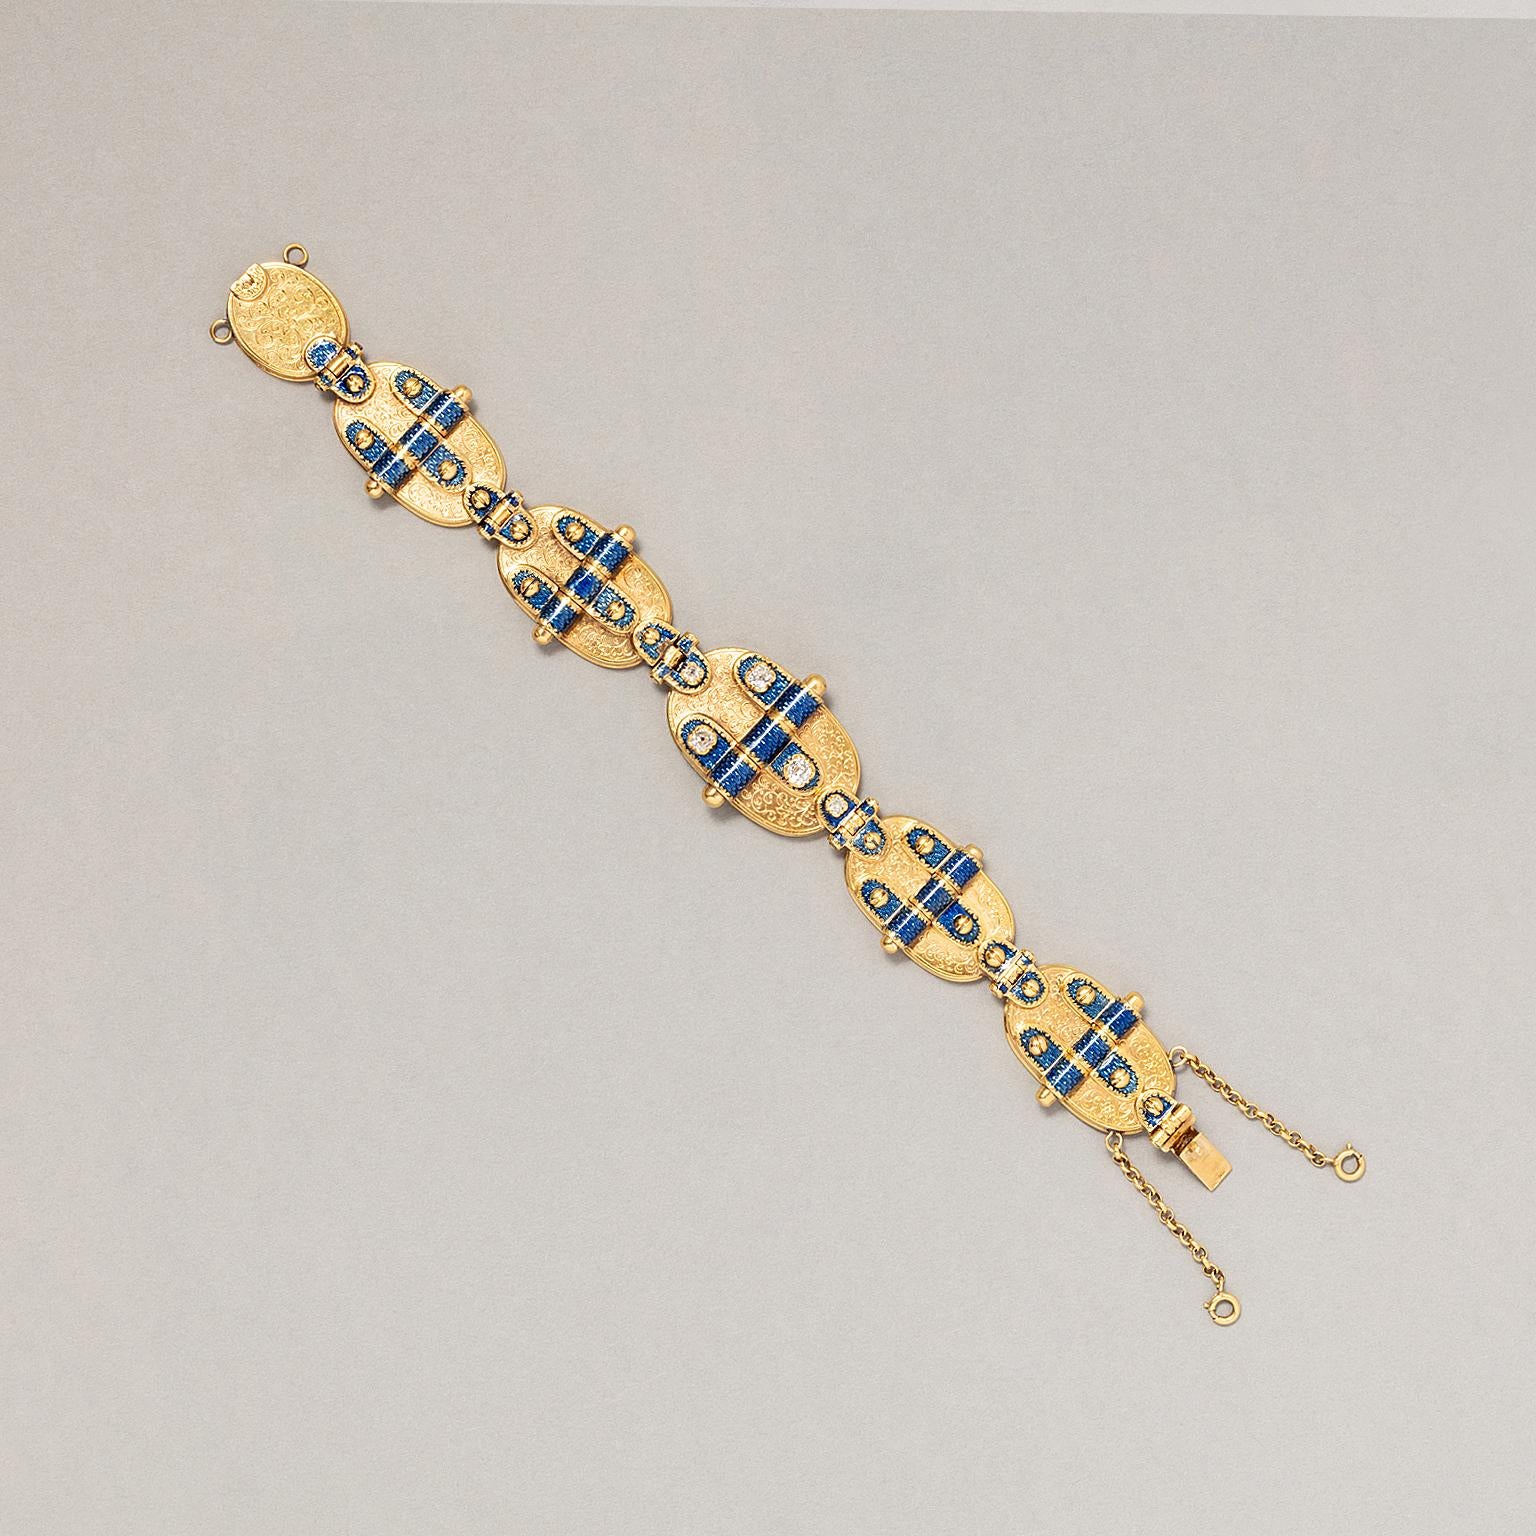 An 14 Carat Yellow Gold Antique Bracelet with Enamel and DIamonds For Sale 1